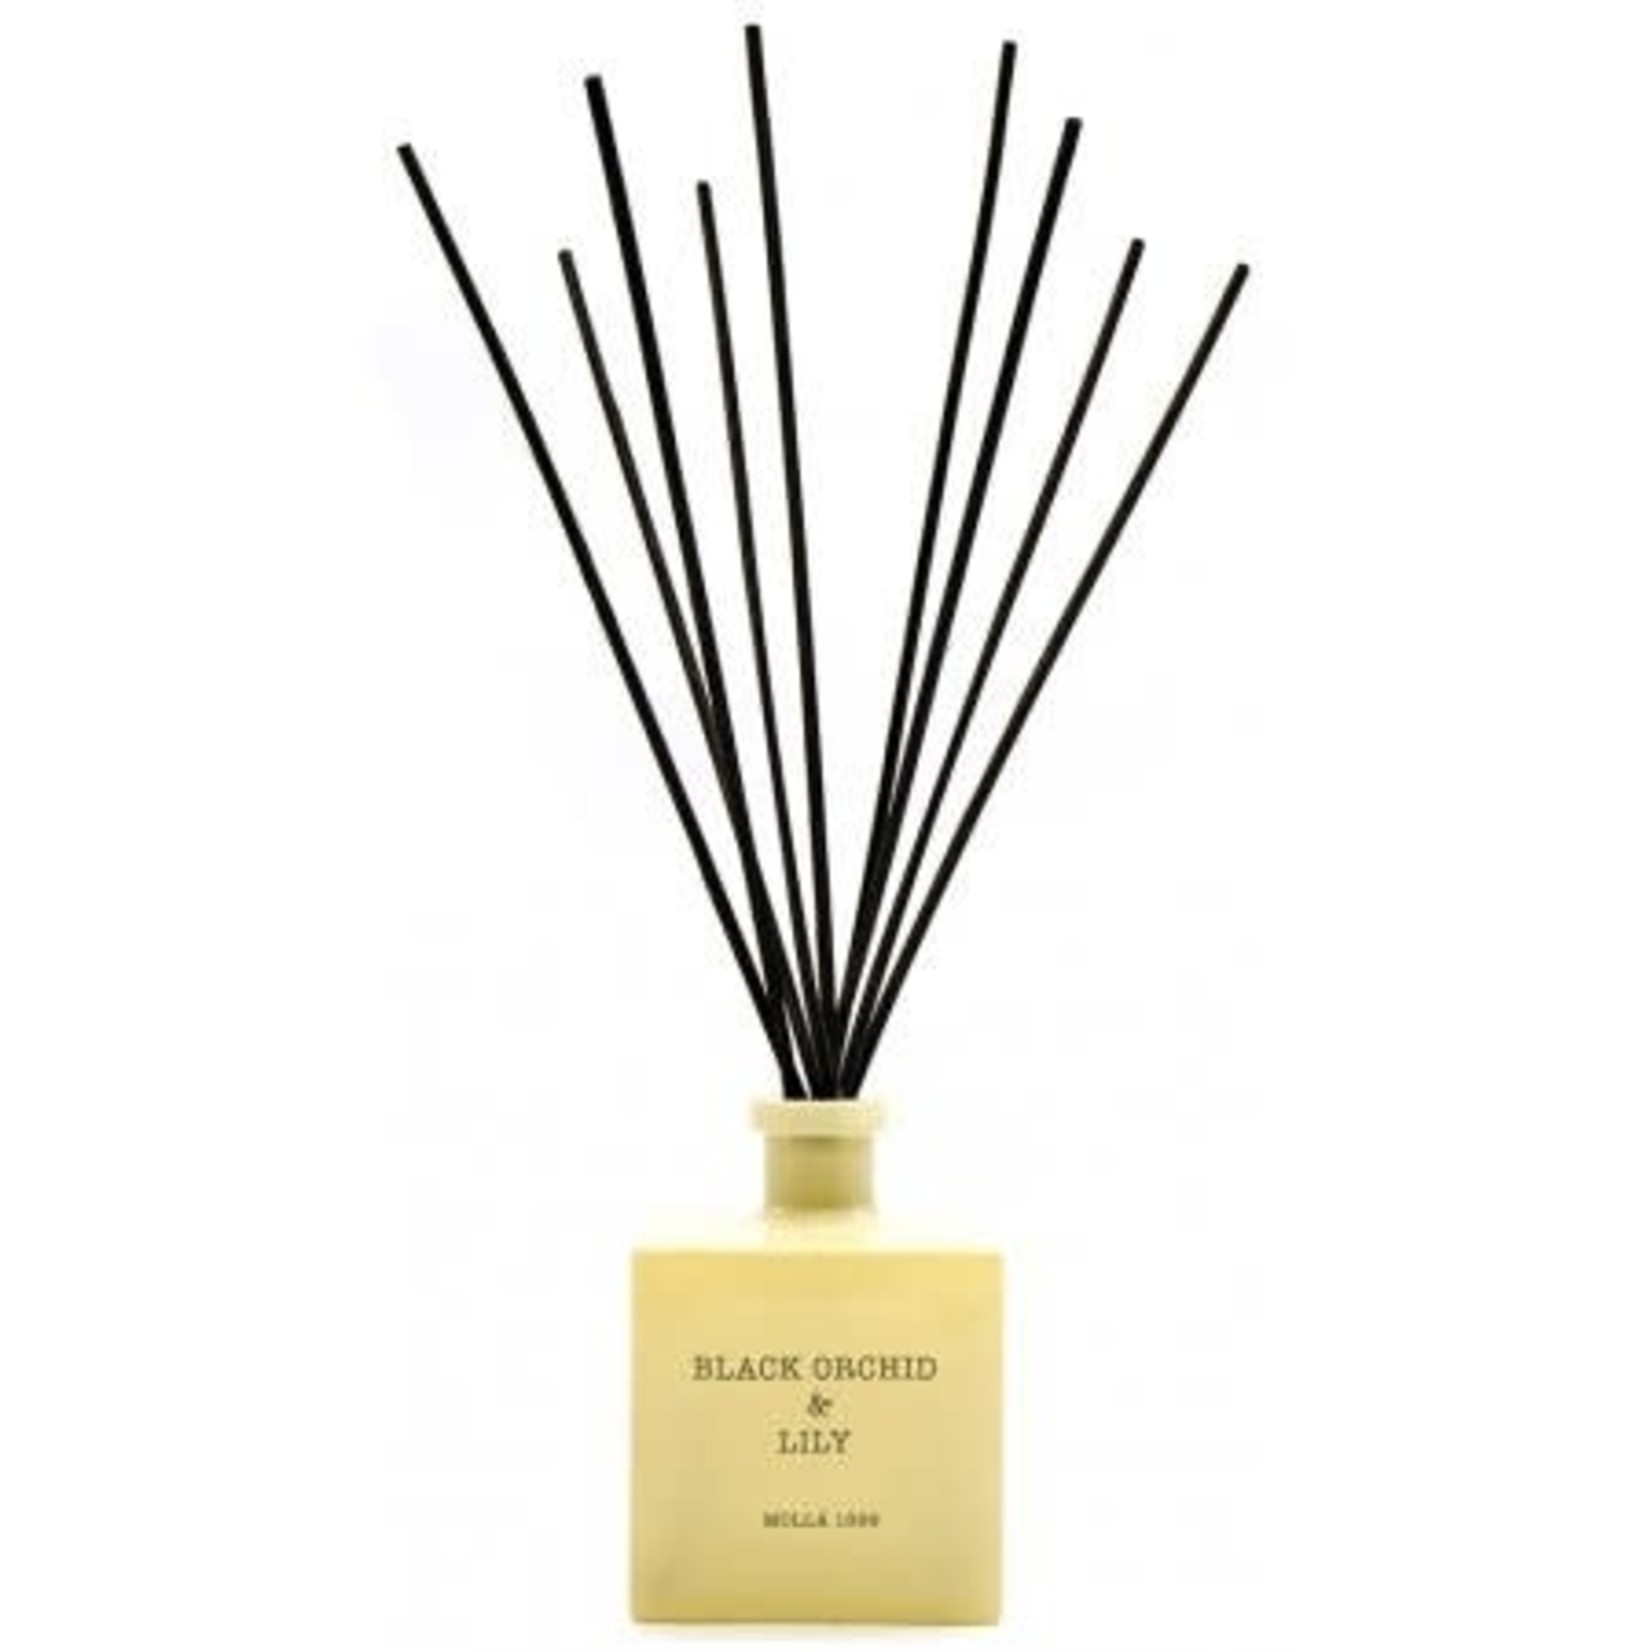 CERERIA MOLLA Diffuseur bâtonnets 500ml Black Orchid & Lily - Ivory